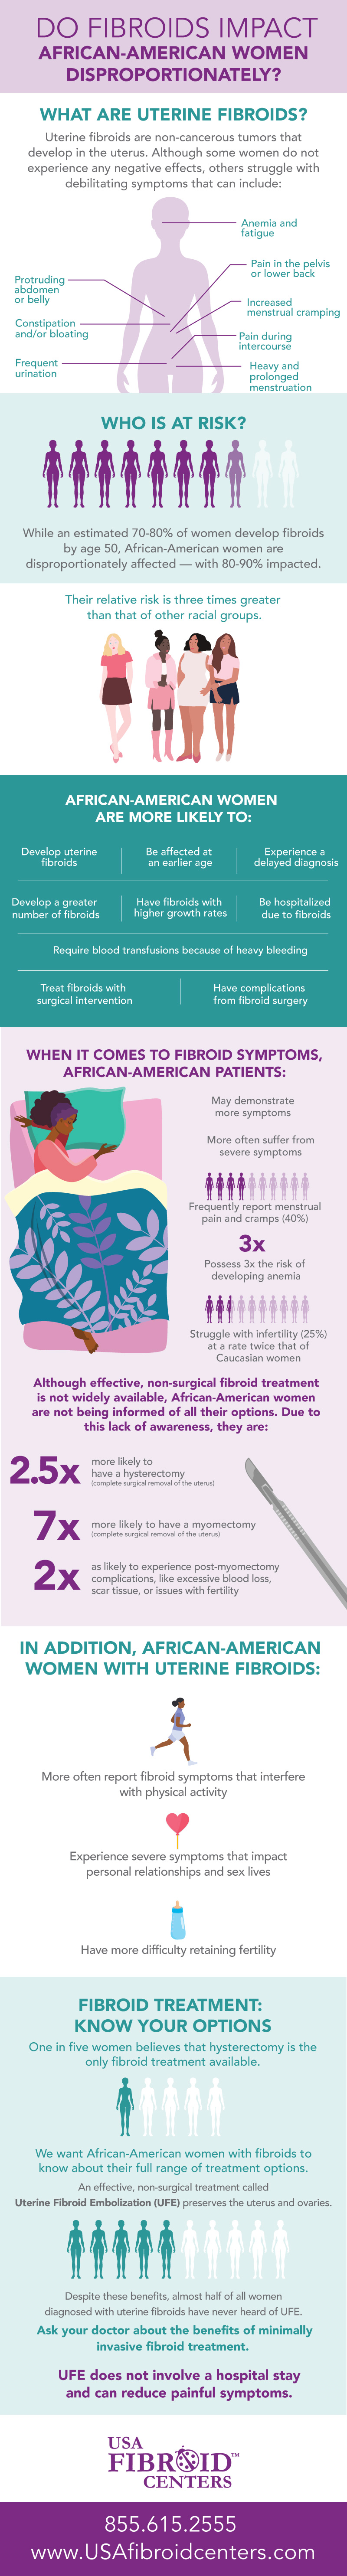 why african-american women have an increased risk of developing uterine fibroids - african americans and fibroids infographic